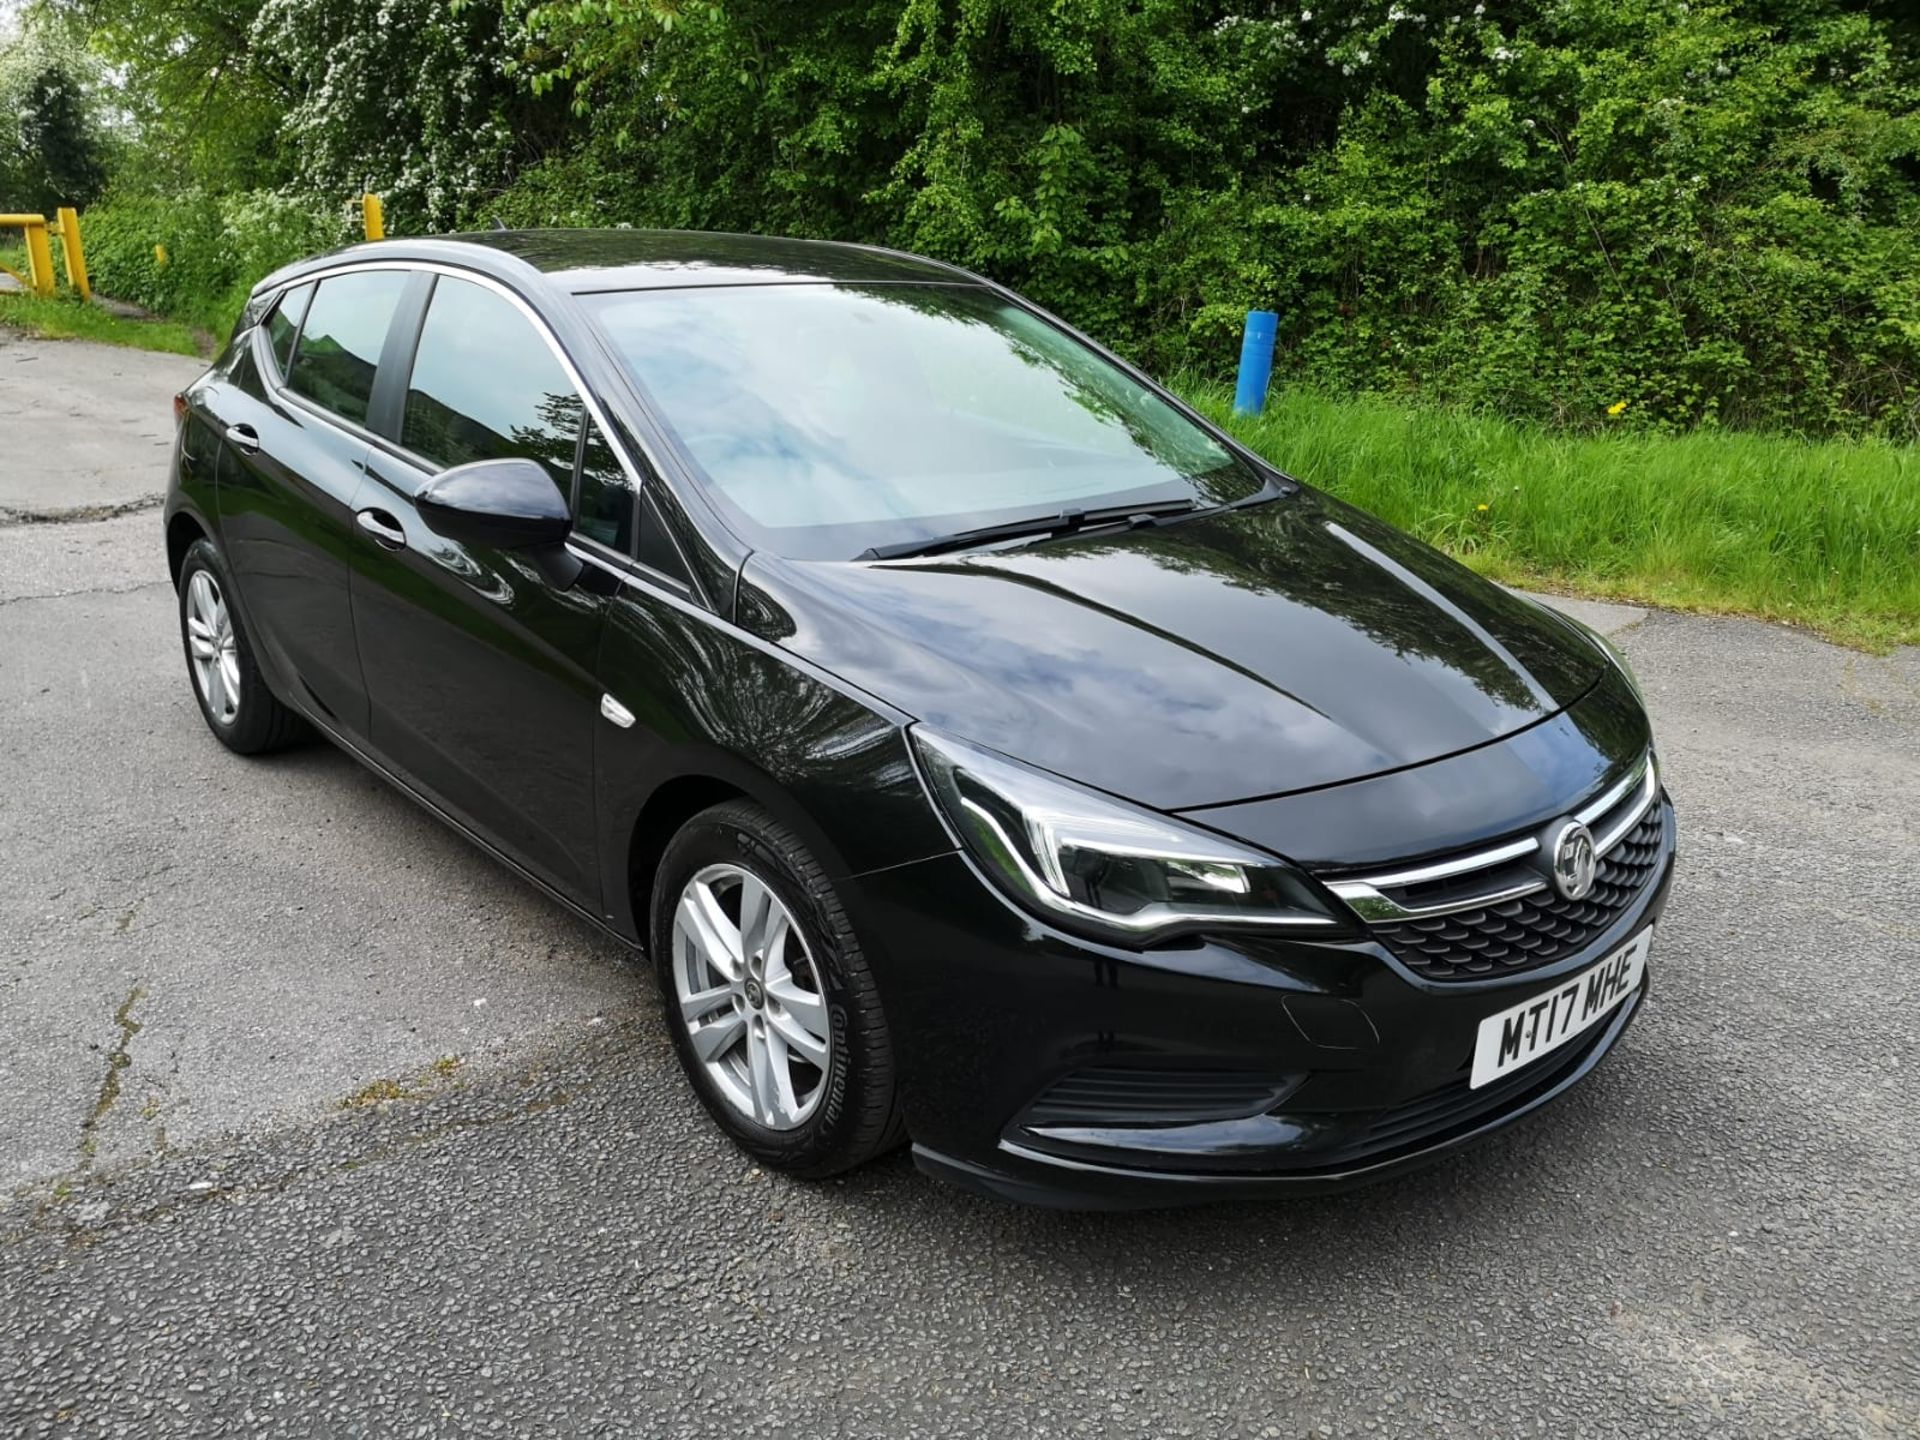 2017/17 REG VAUXHALL ASTRA TECH LINE TURBO S/S 1.4 PETROL AUTOMATIC, SHOWING 1 FORMER KEEPER